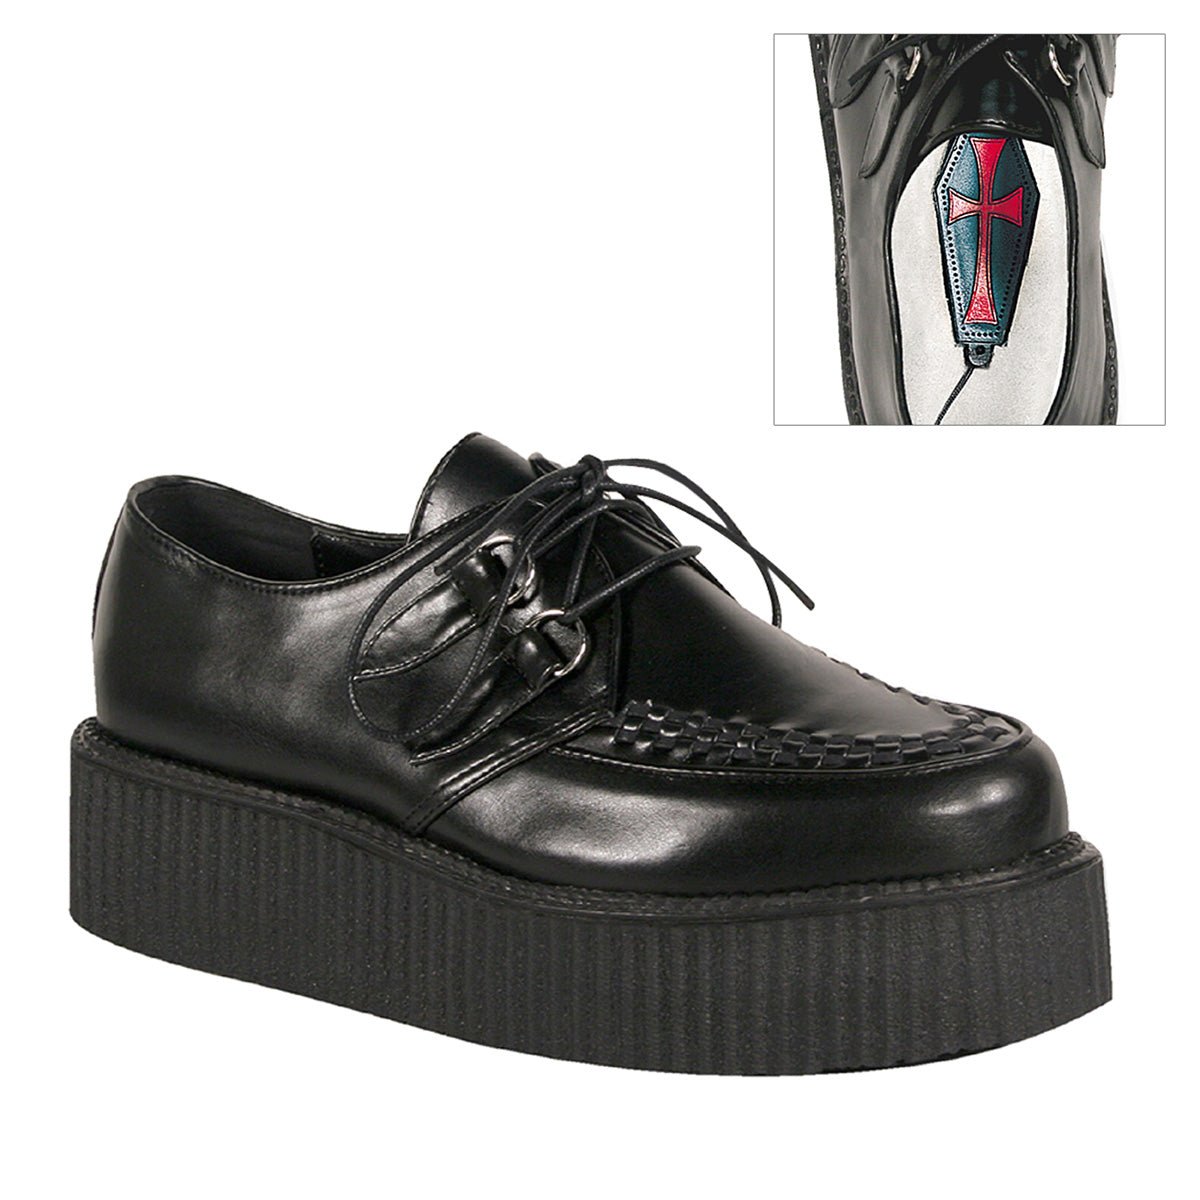 DemoniaCult V CREEPER 502 Creepers - From DemoniaCult Sold By Alternative Footwear